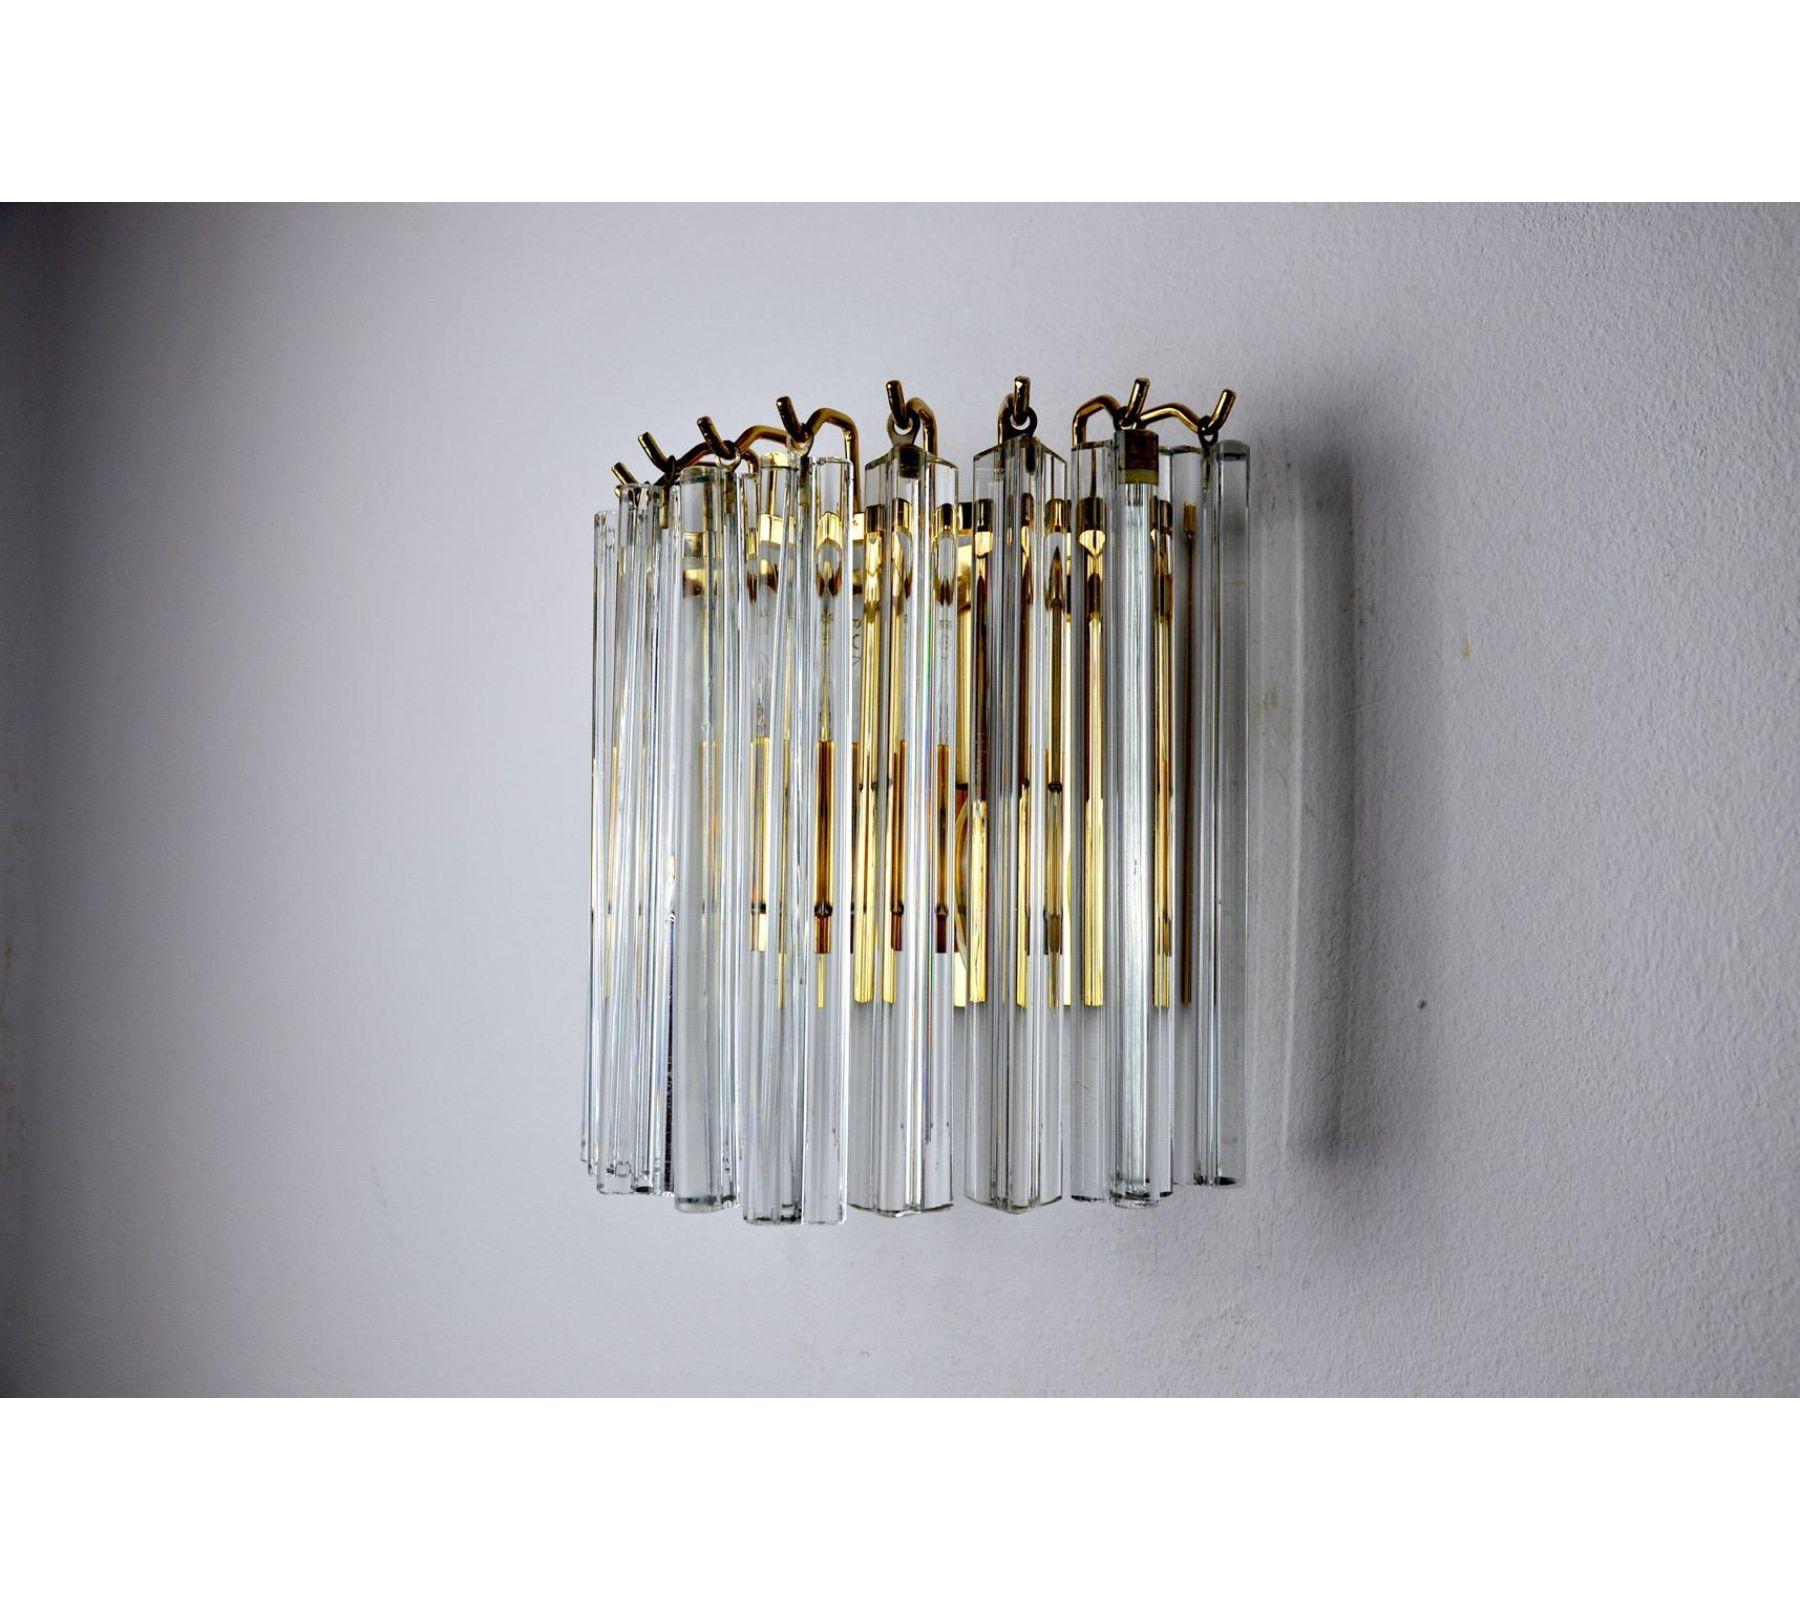 Very beautiful venini wall lamp dating from the 70s. Cut glass and gilded metal structure. Unique object that will illuminate and bring a real design touch to your interior. Electricity verified, mark of time relative to the age of the object. Easy